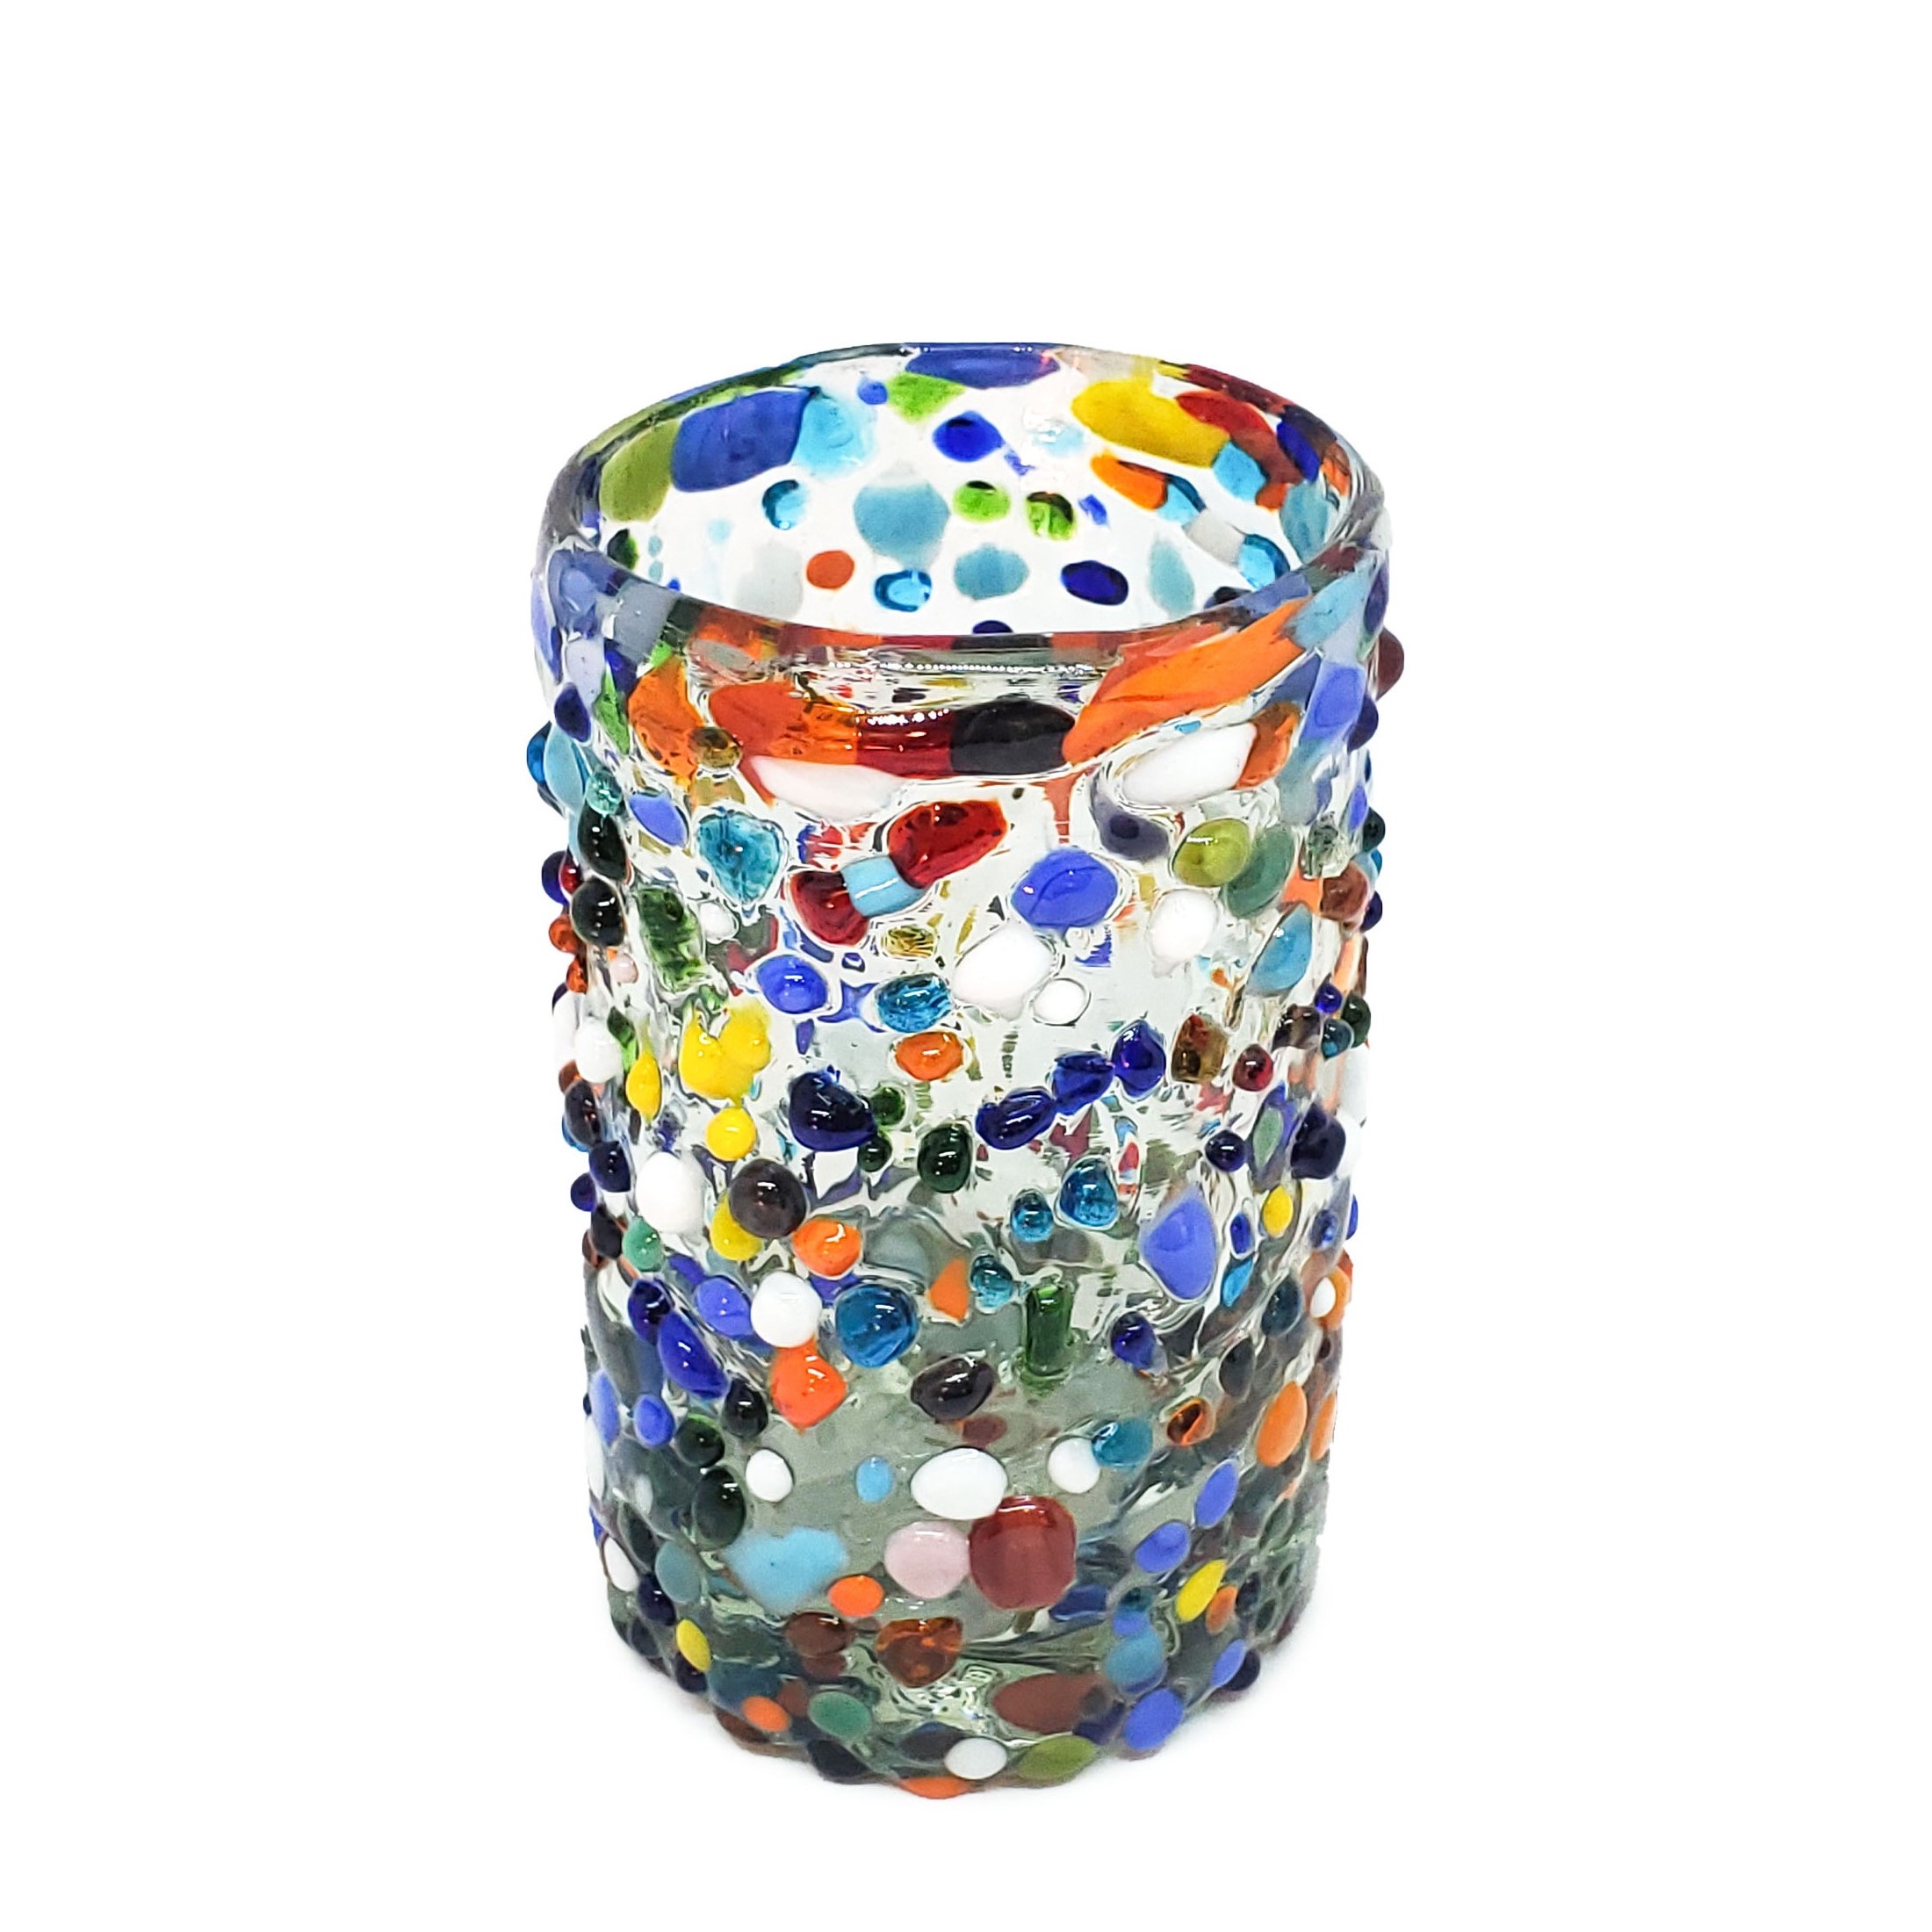 Sale Items / Confetti Rocks 9 oz Juice Glasses (set of 6) / Let the spring come into your home with this colorful set of glasses. The multicolor glass rocks decoration makes them a standout in any place.